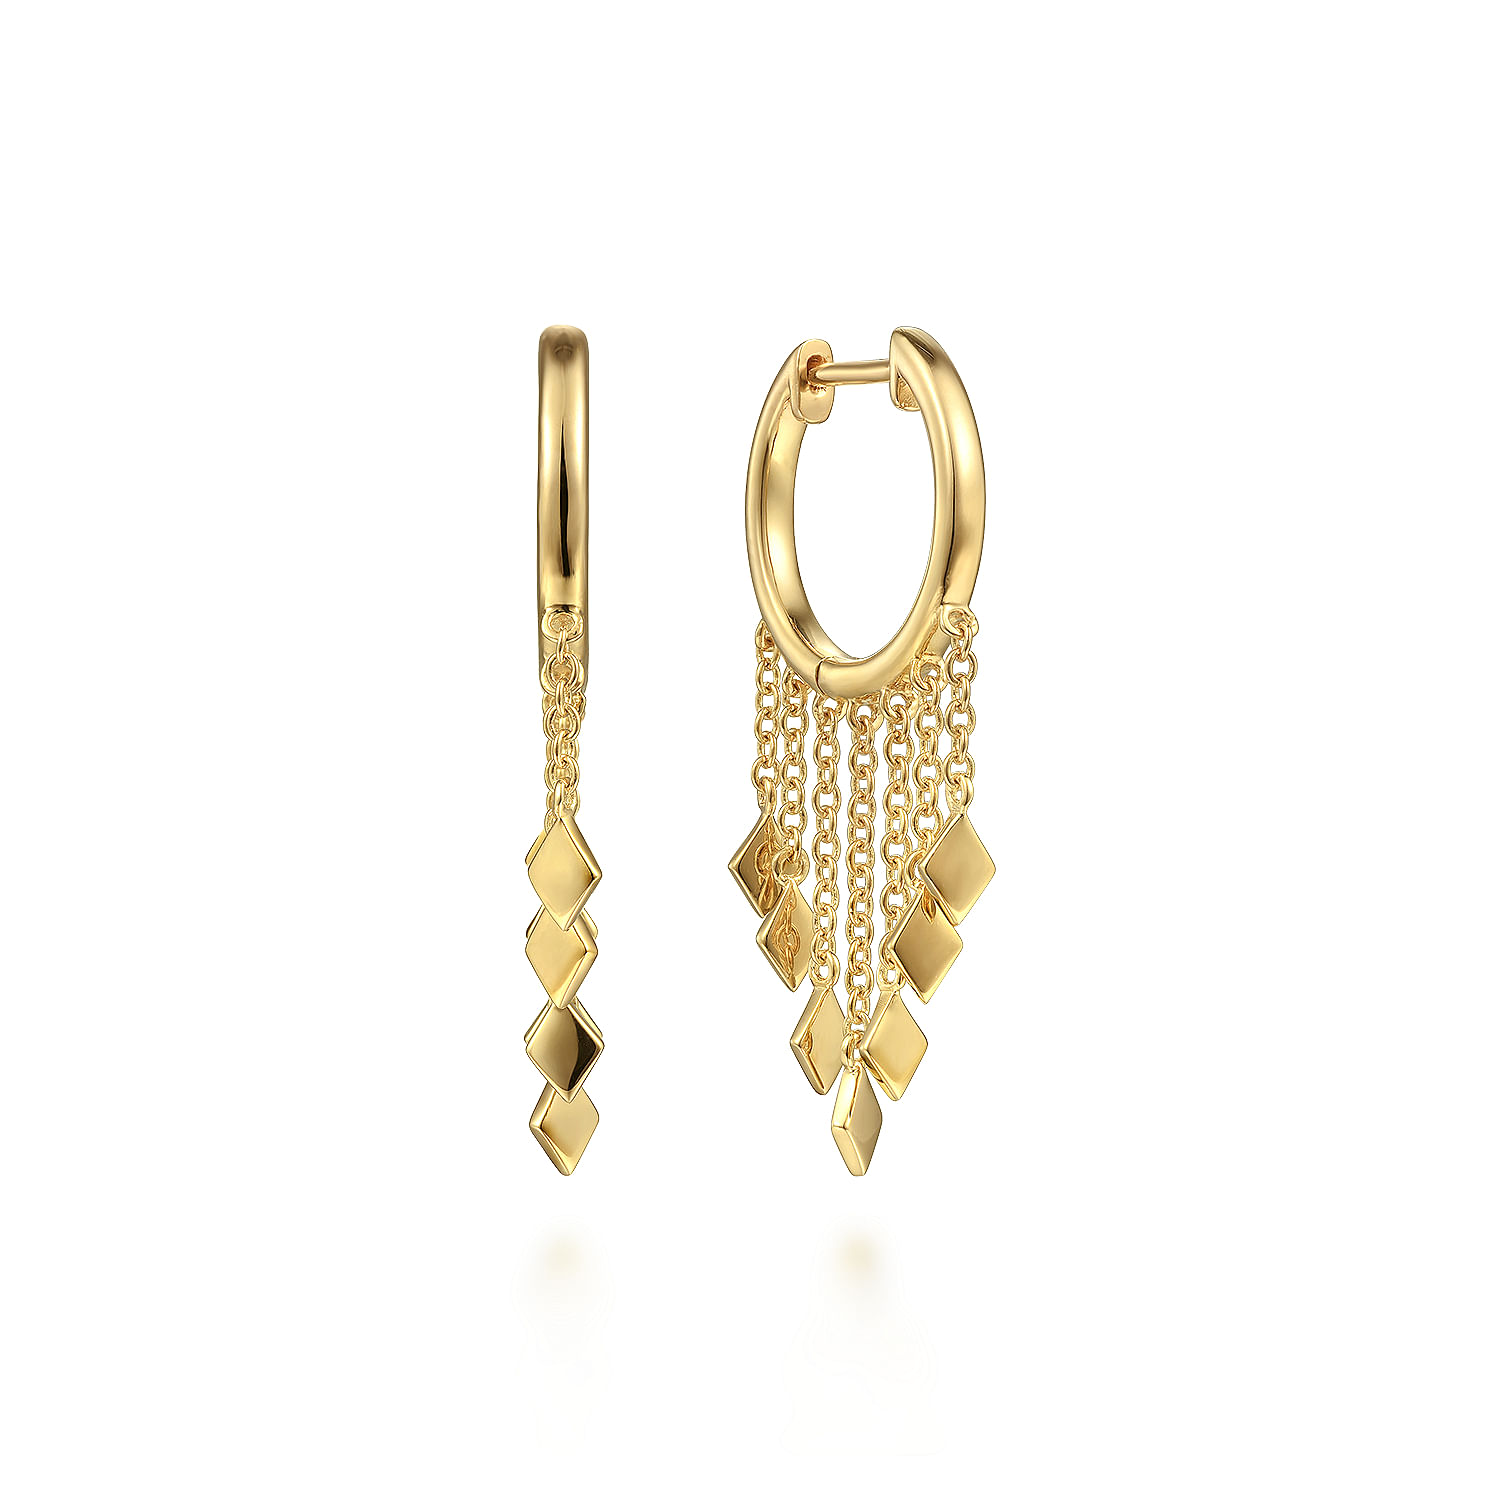 14K-Yellow-Gold-Huggie-Earrings-with-Chain-and-Diamond-Tassel-Drops1